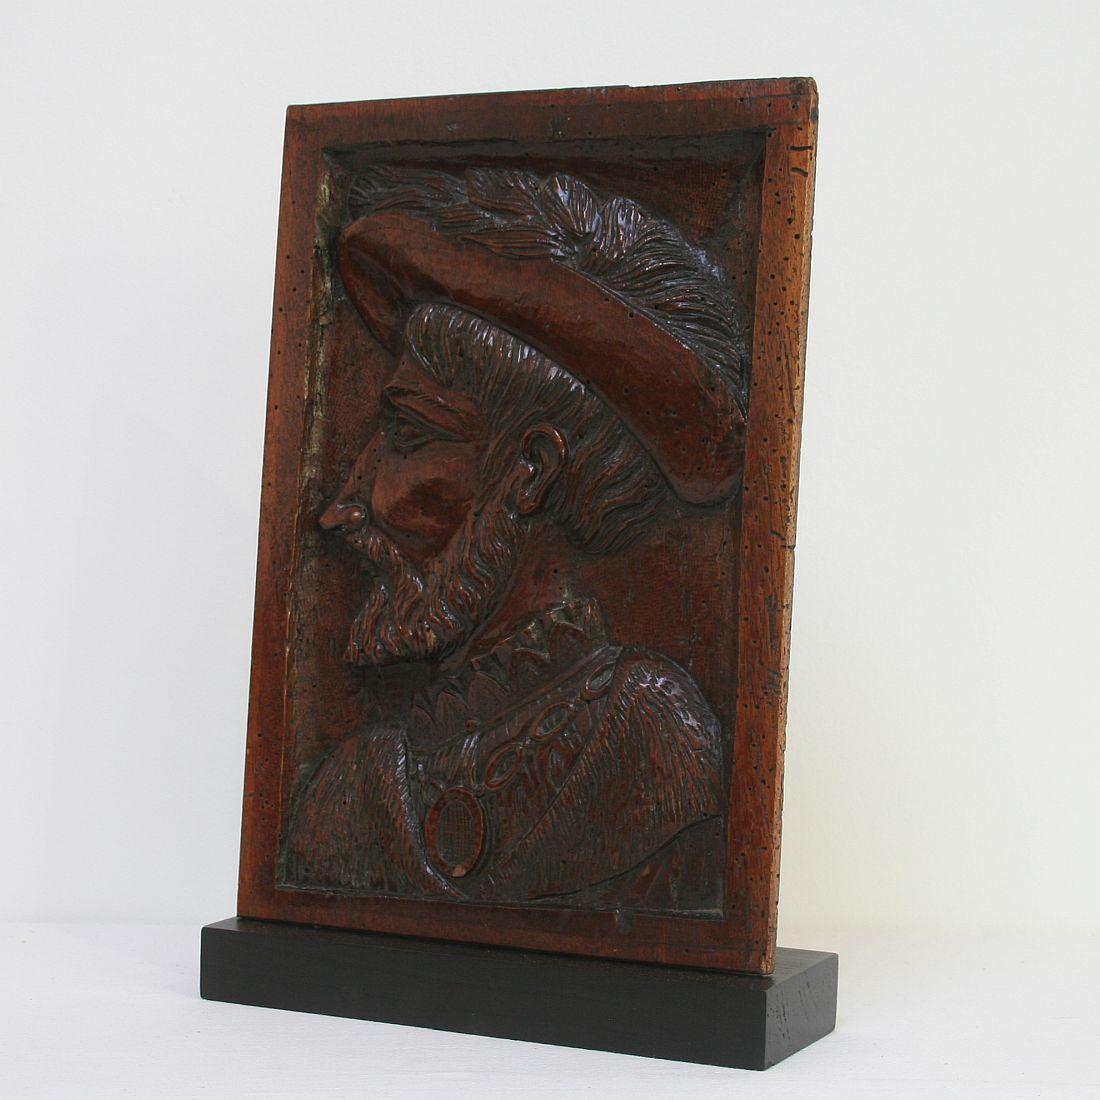 Hand-Carved 18th Century French Carved Wooden Panel with Portrait